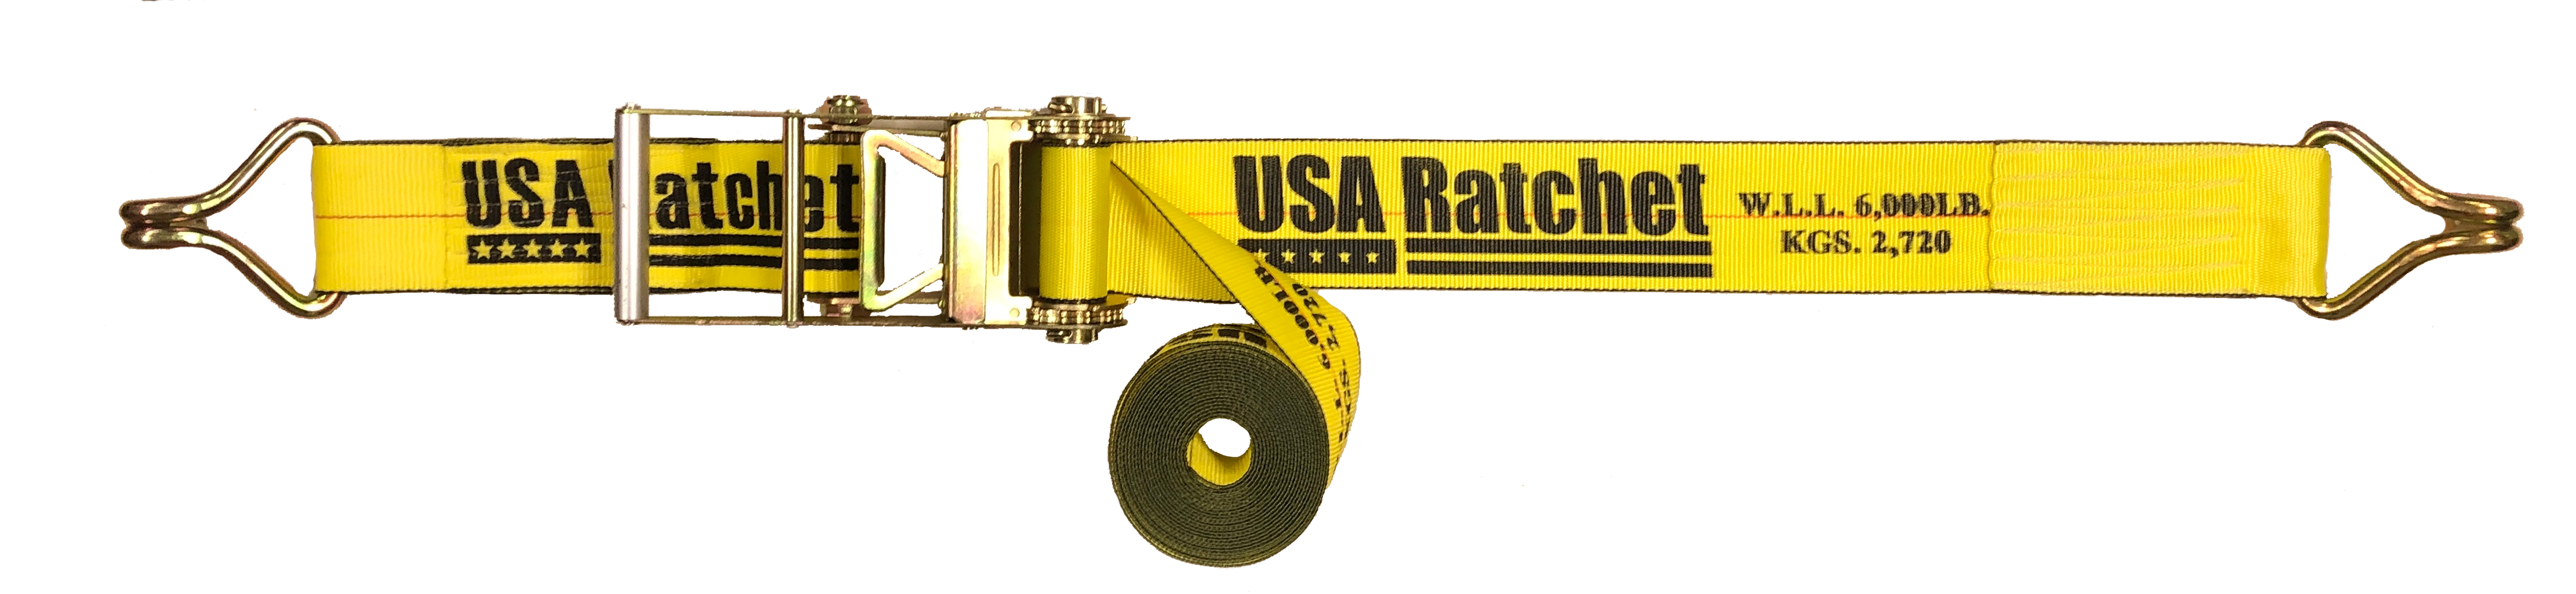 4" SPIN FREE Ratchet Straps with Wire Hooks